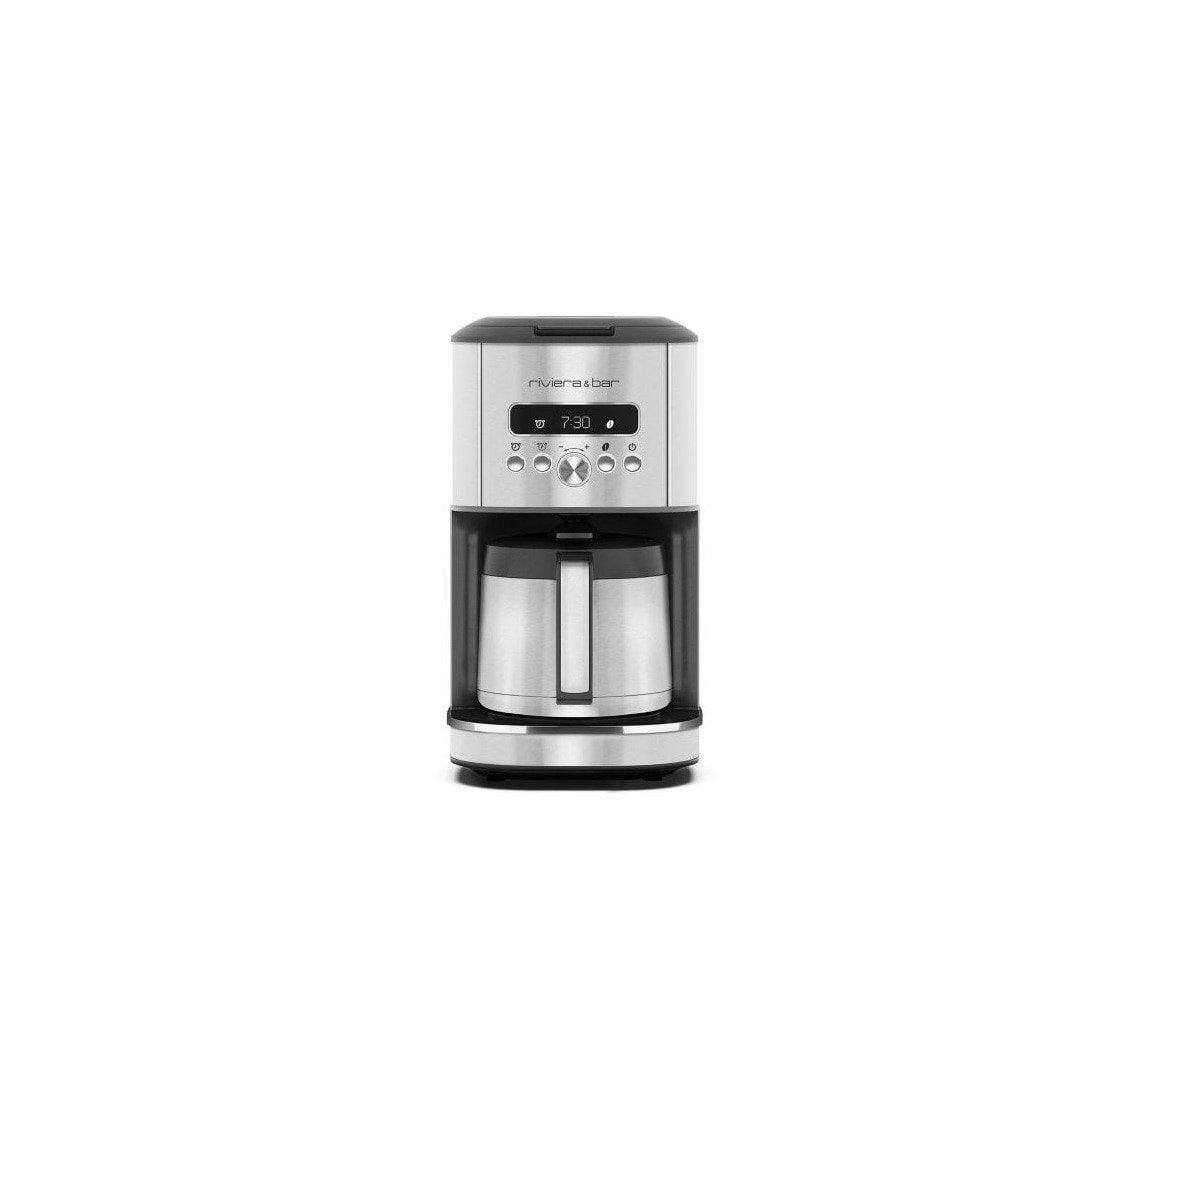 Cafetière isotherme programmable 15 tasses 950w inox bcf580